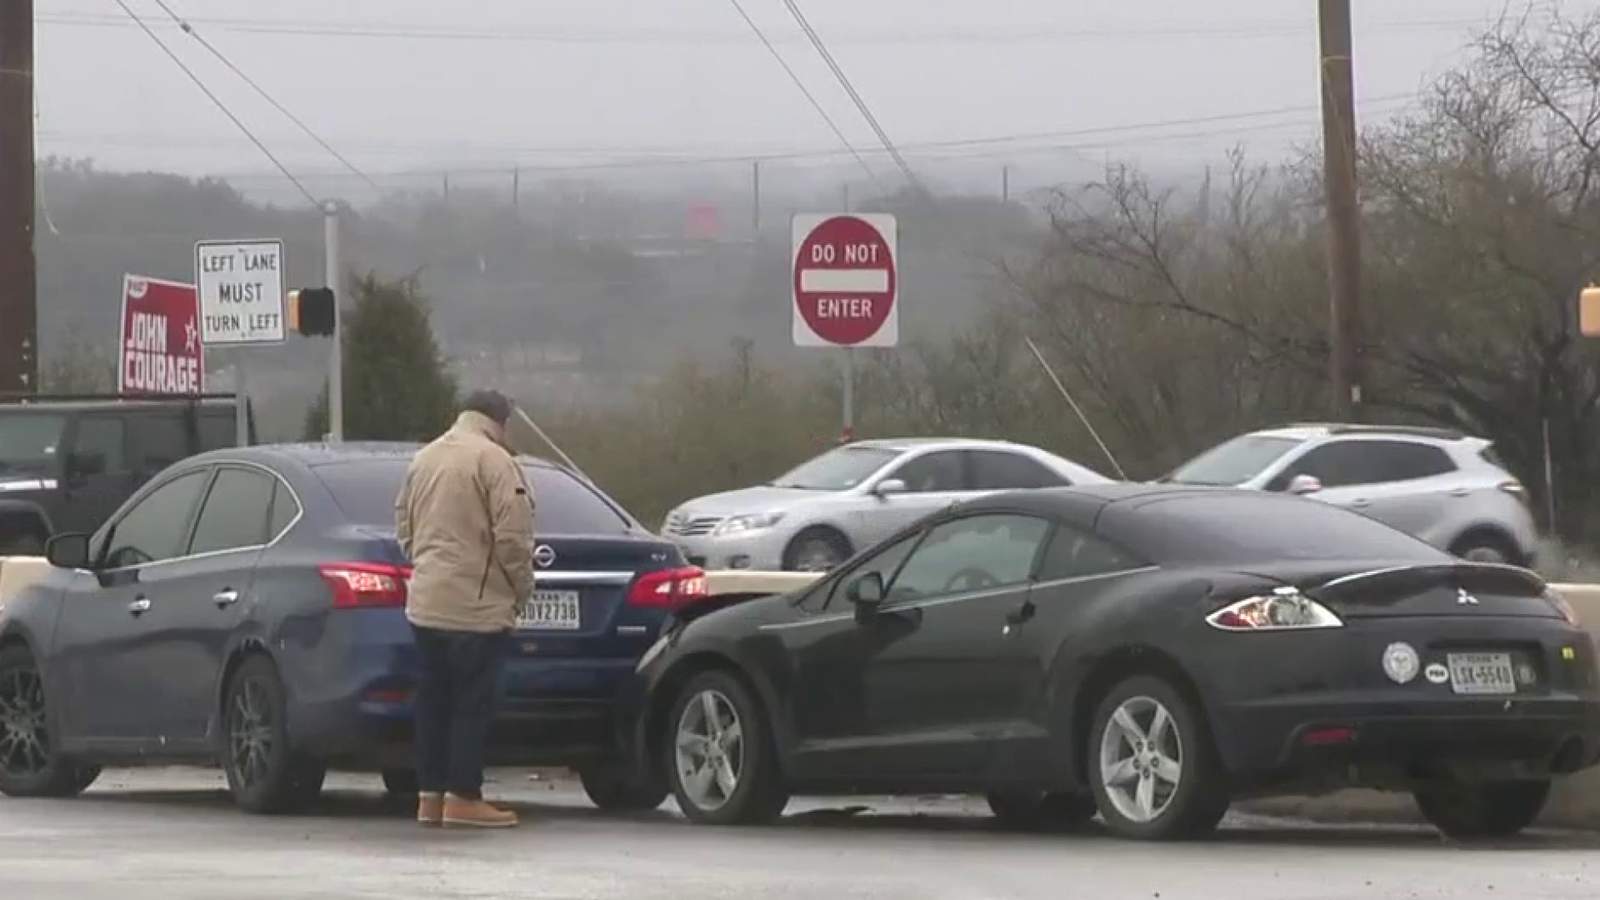 San Antonio police respond to more than 100 calls for weather-related crashes since Sunday afternoon